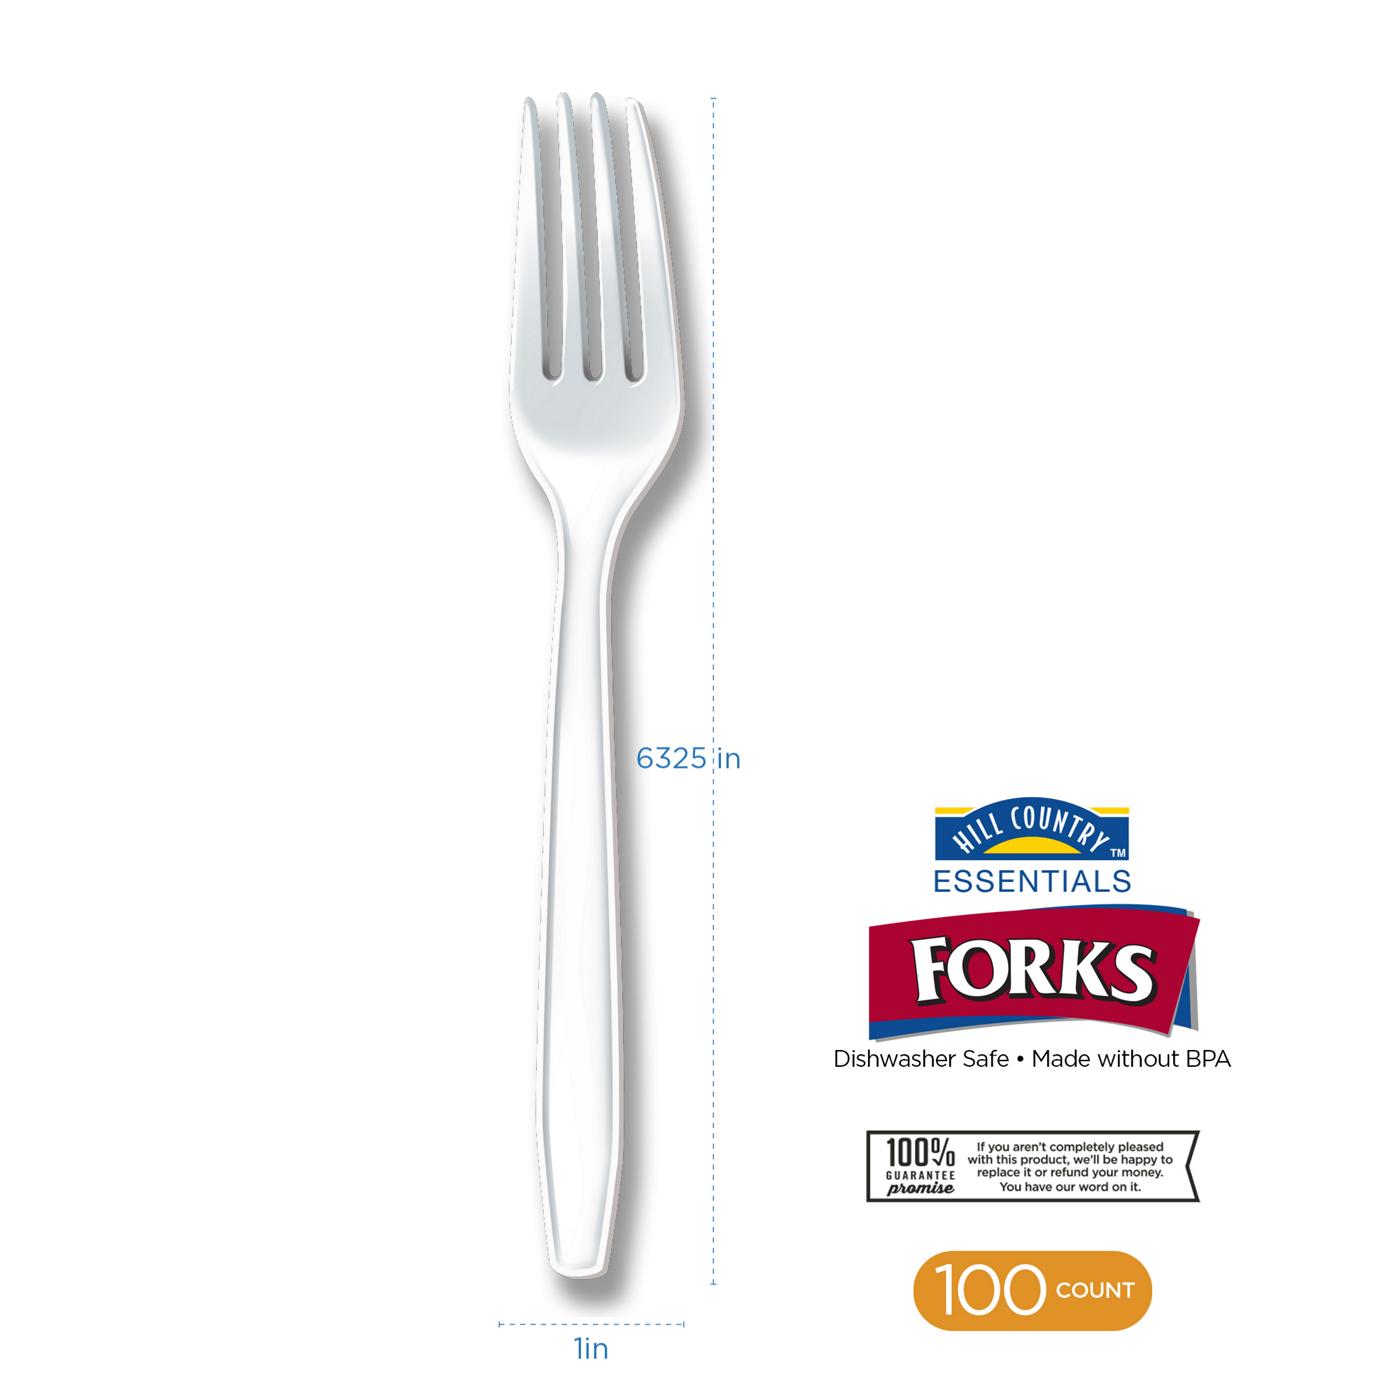 Hill Country Essentials Plastic Forks - White; image 2 of 3